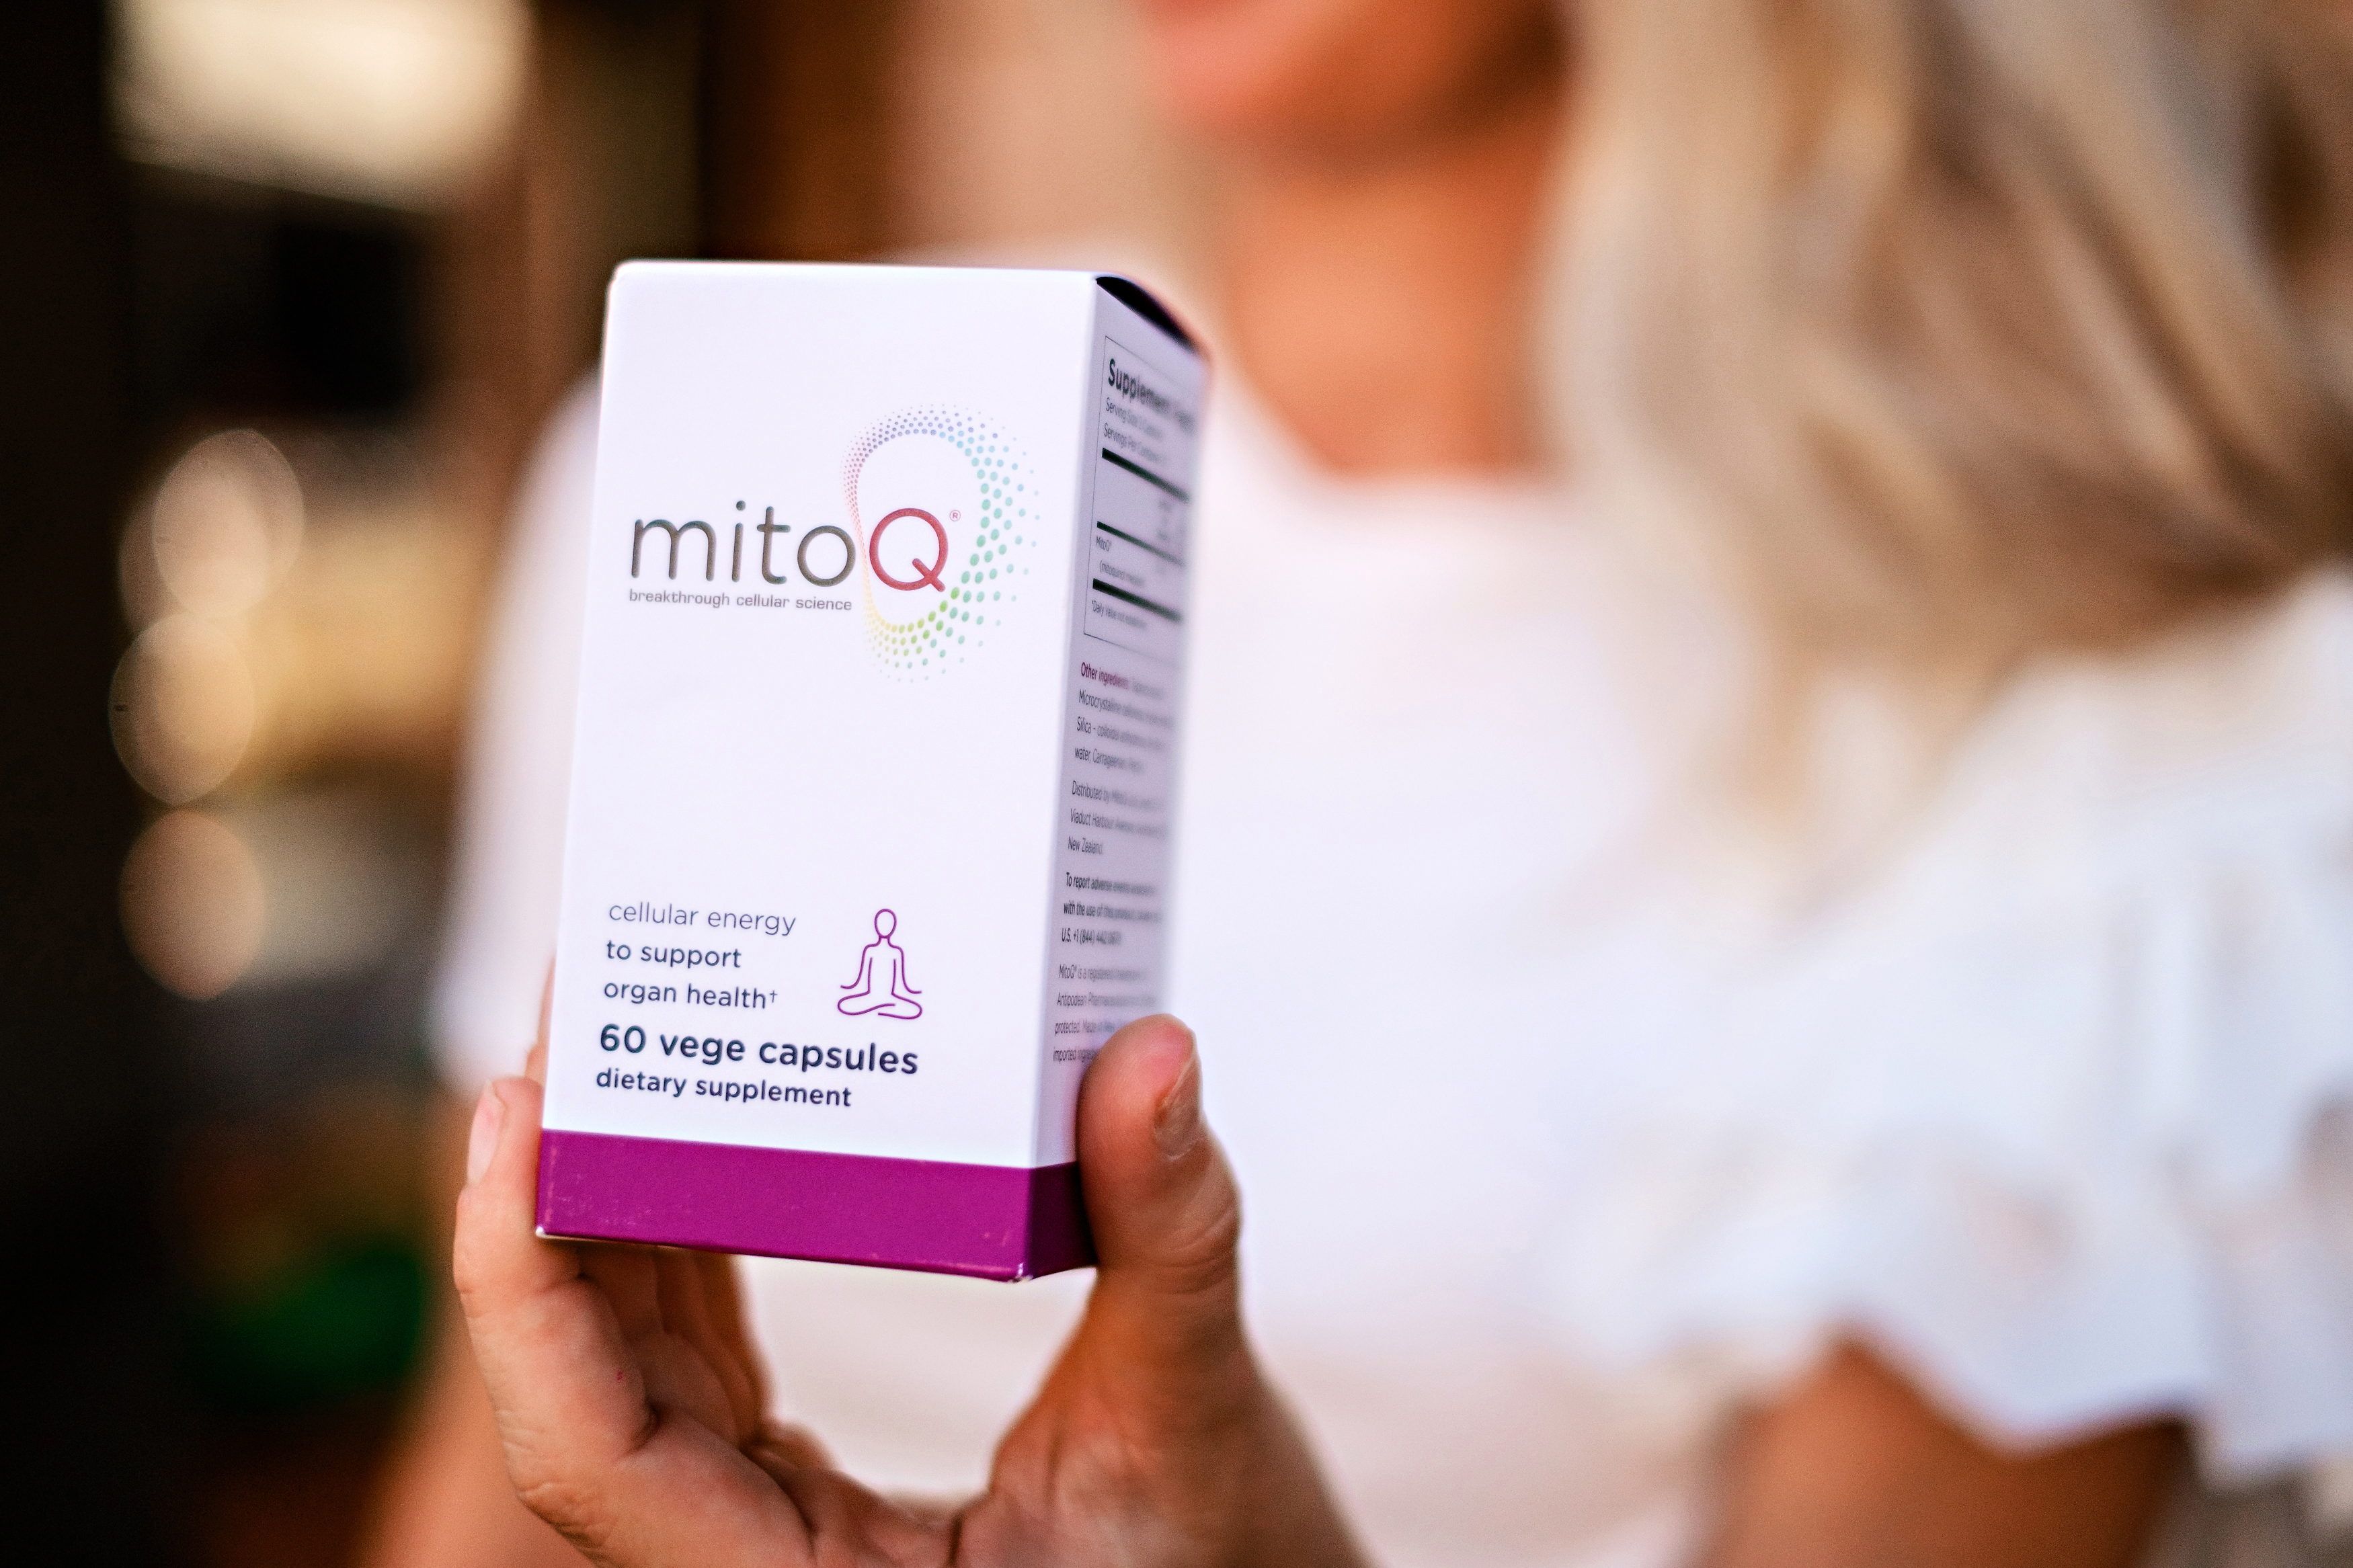 Looking for a great supplement for organ health? Try MitoQ! Popular Atlanta Blogger Happily Hughes is sharing why she is loving MitoQ here!